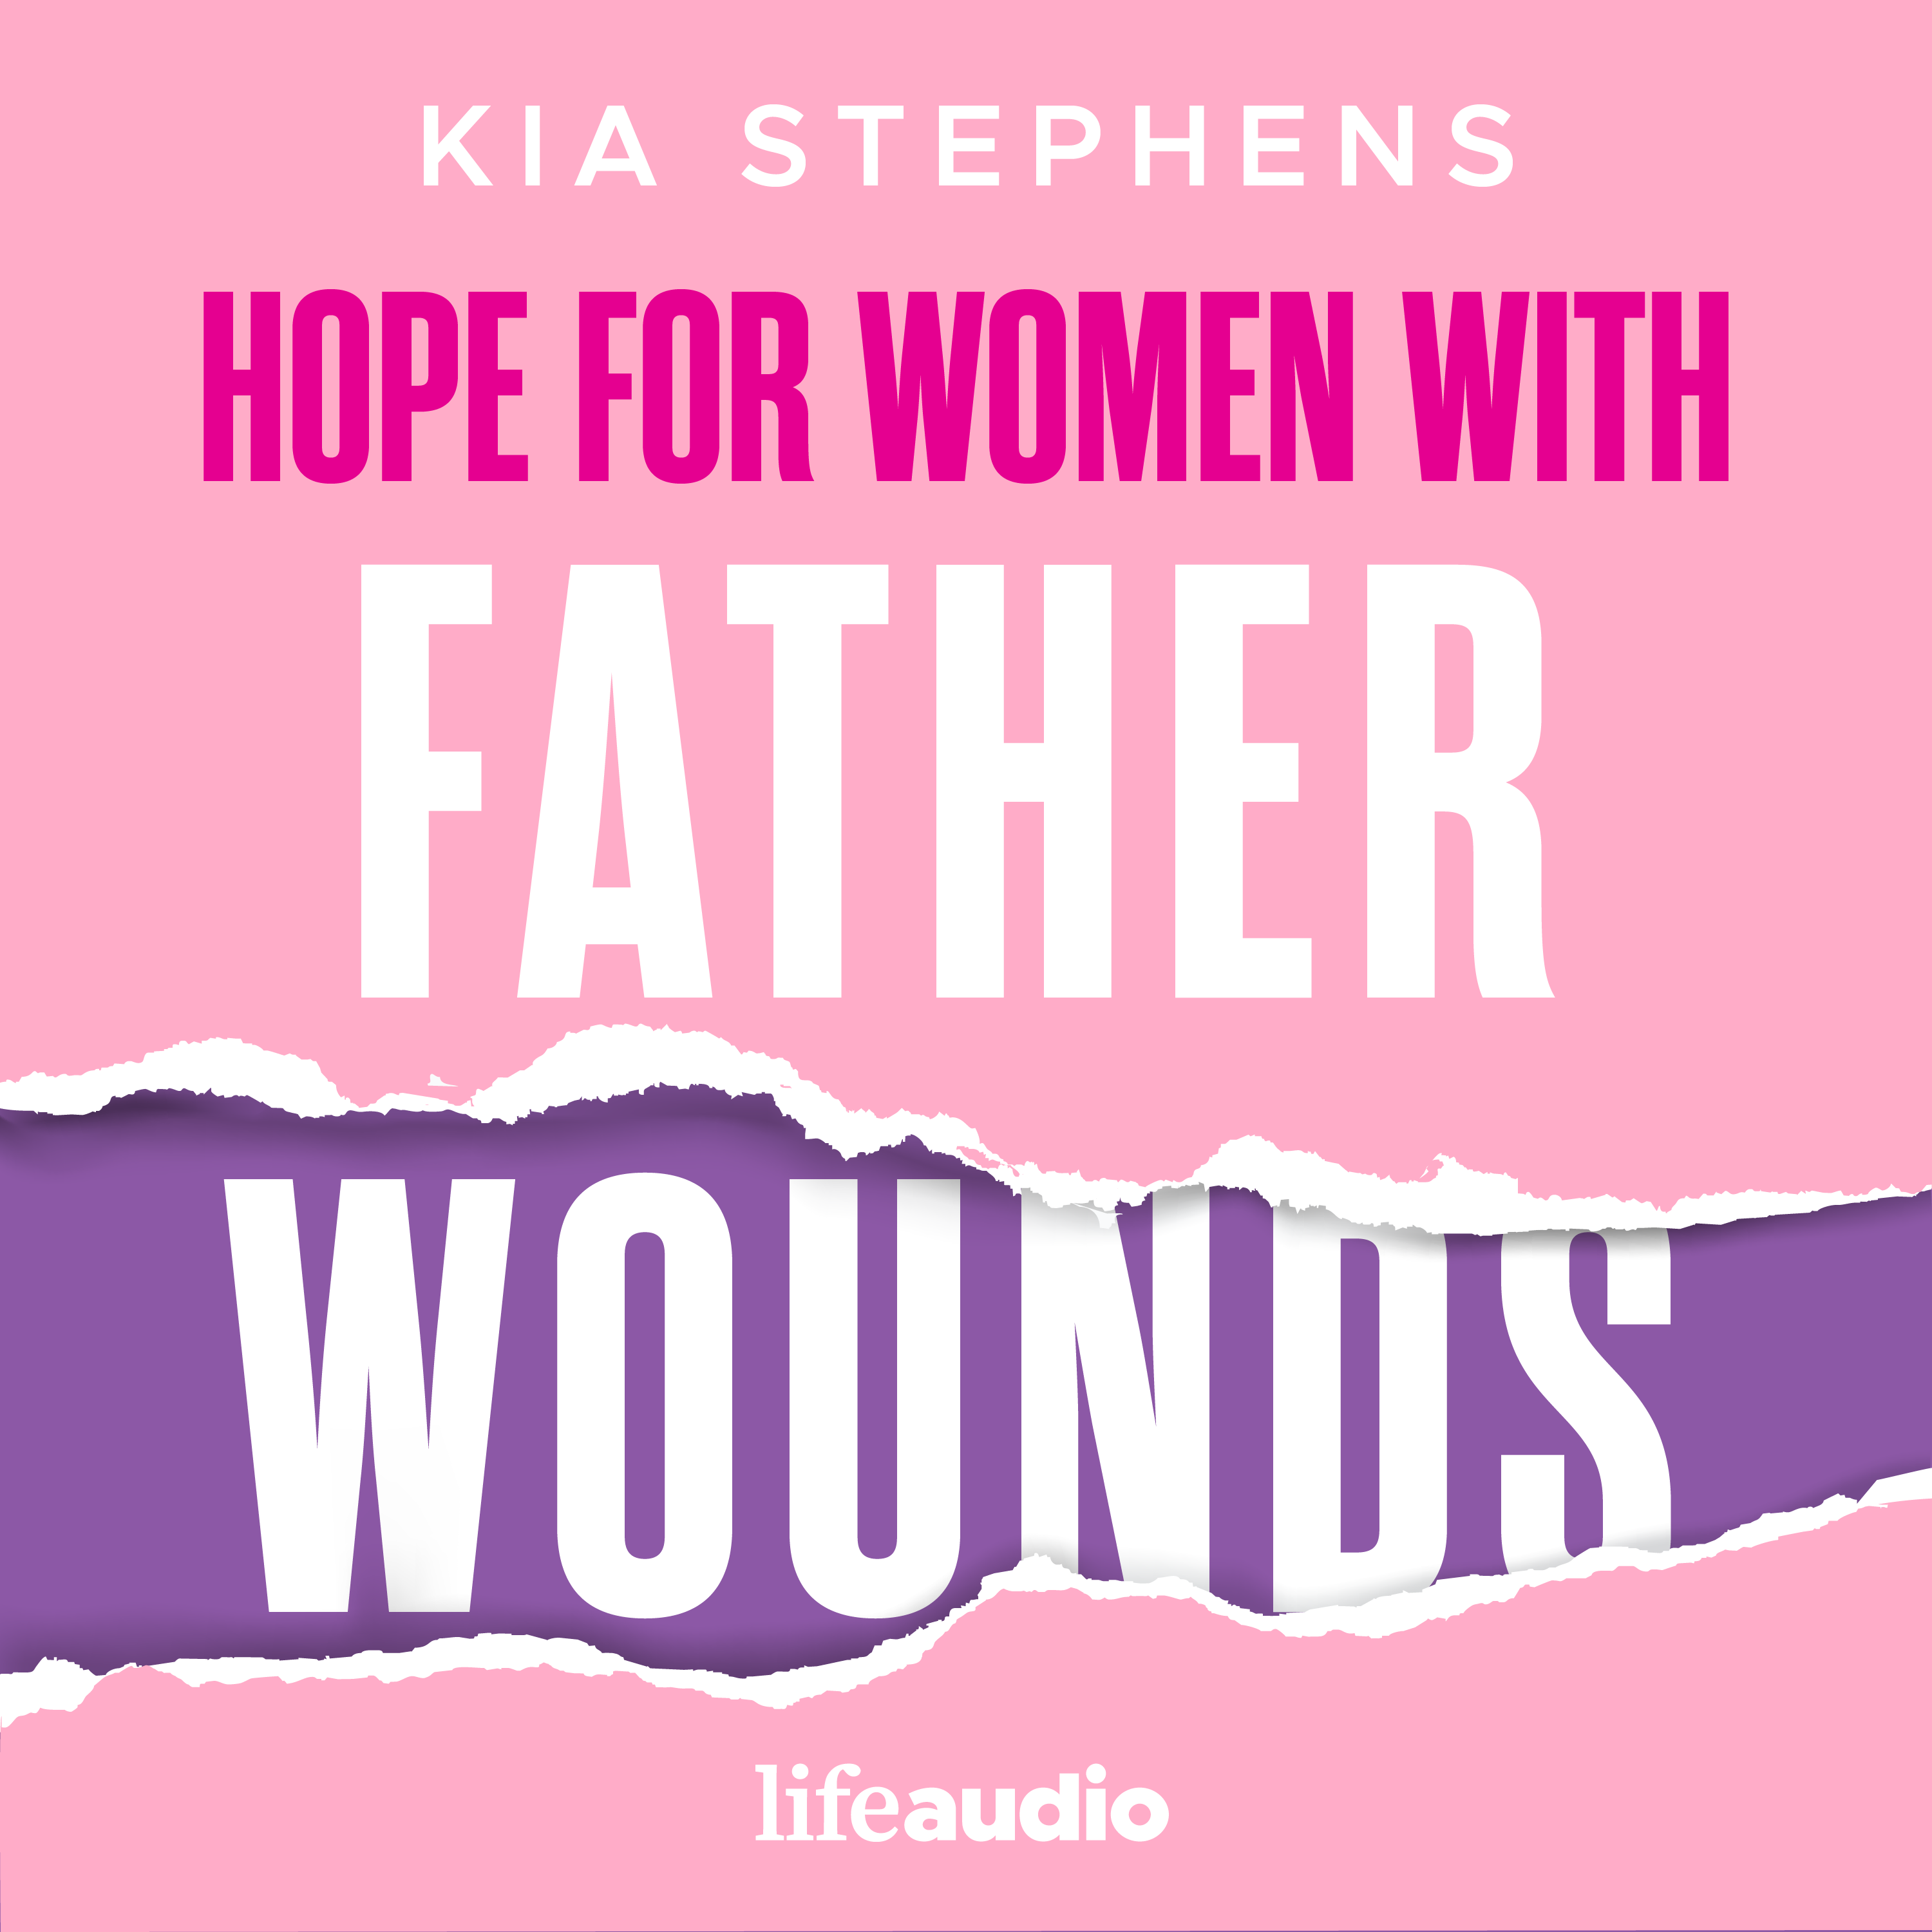 Daily Affirmations for the Woman with Father Wounds